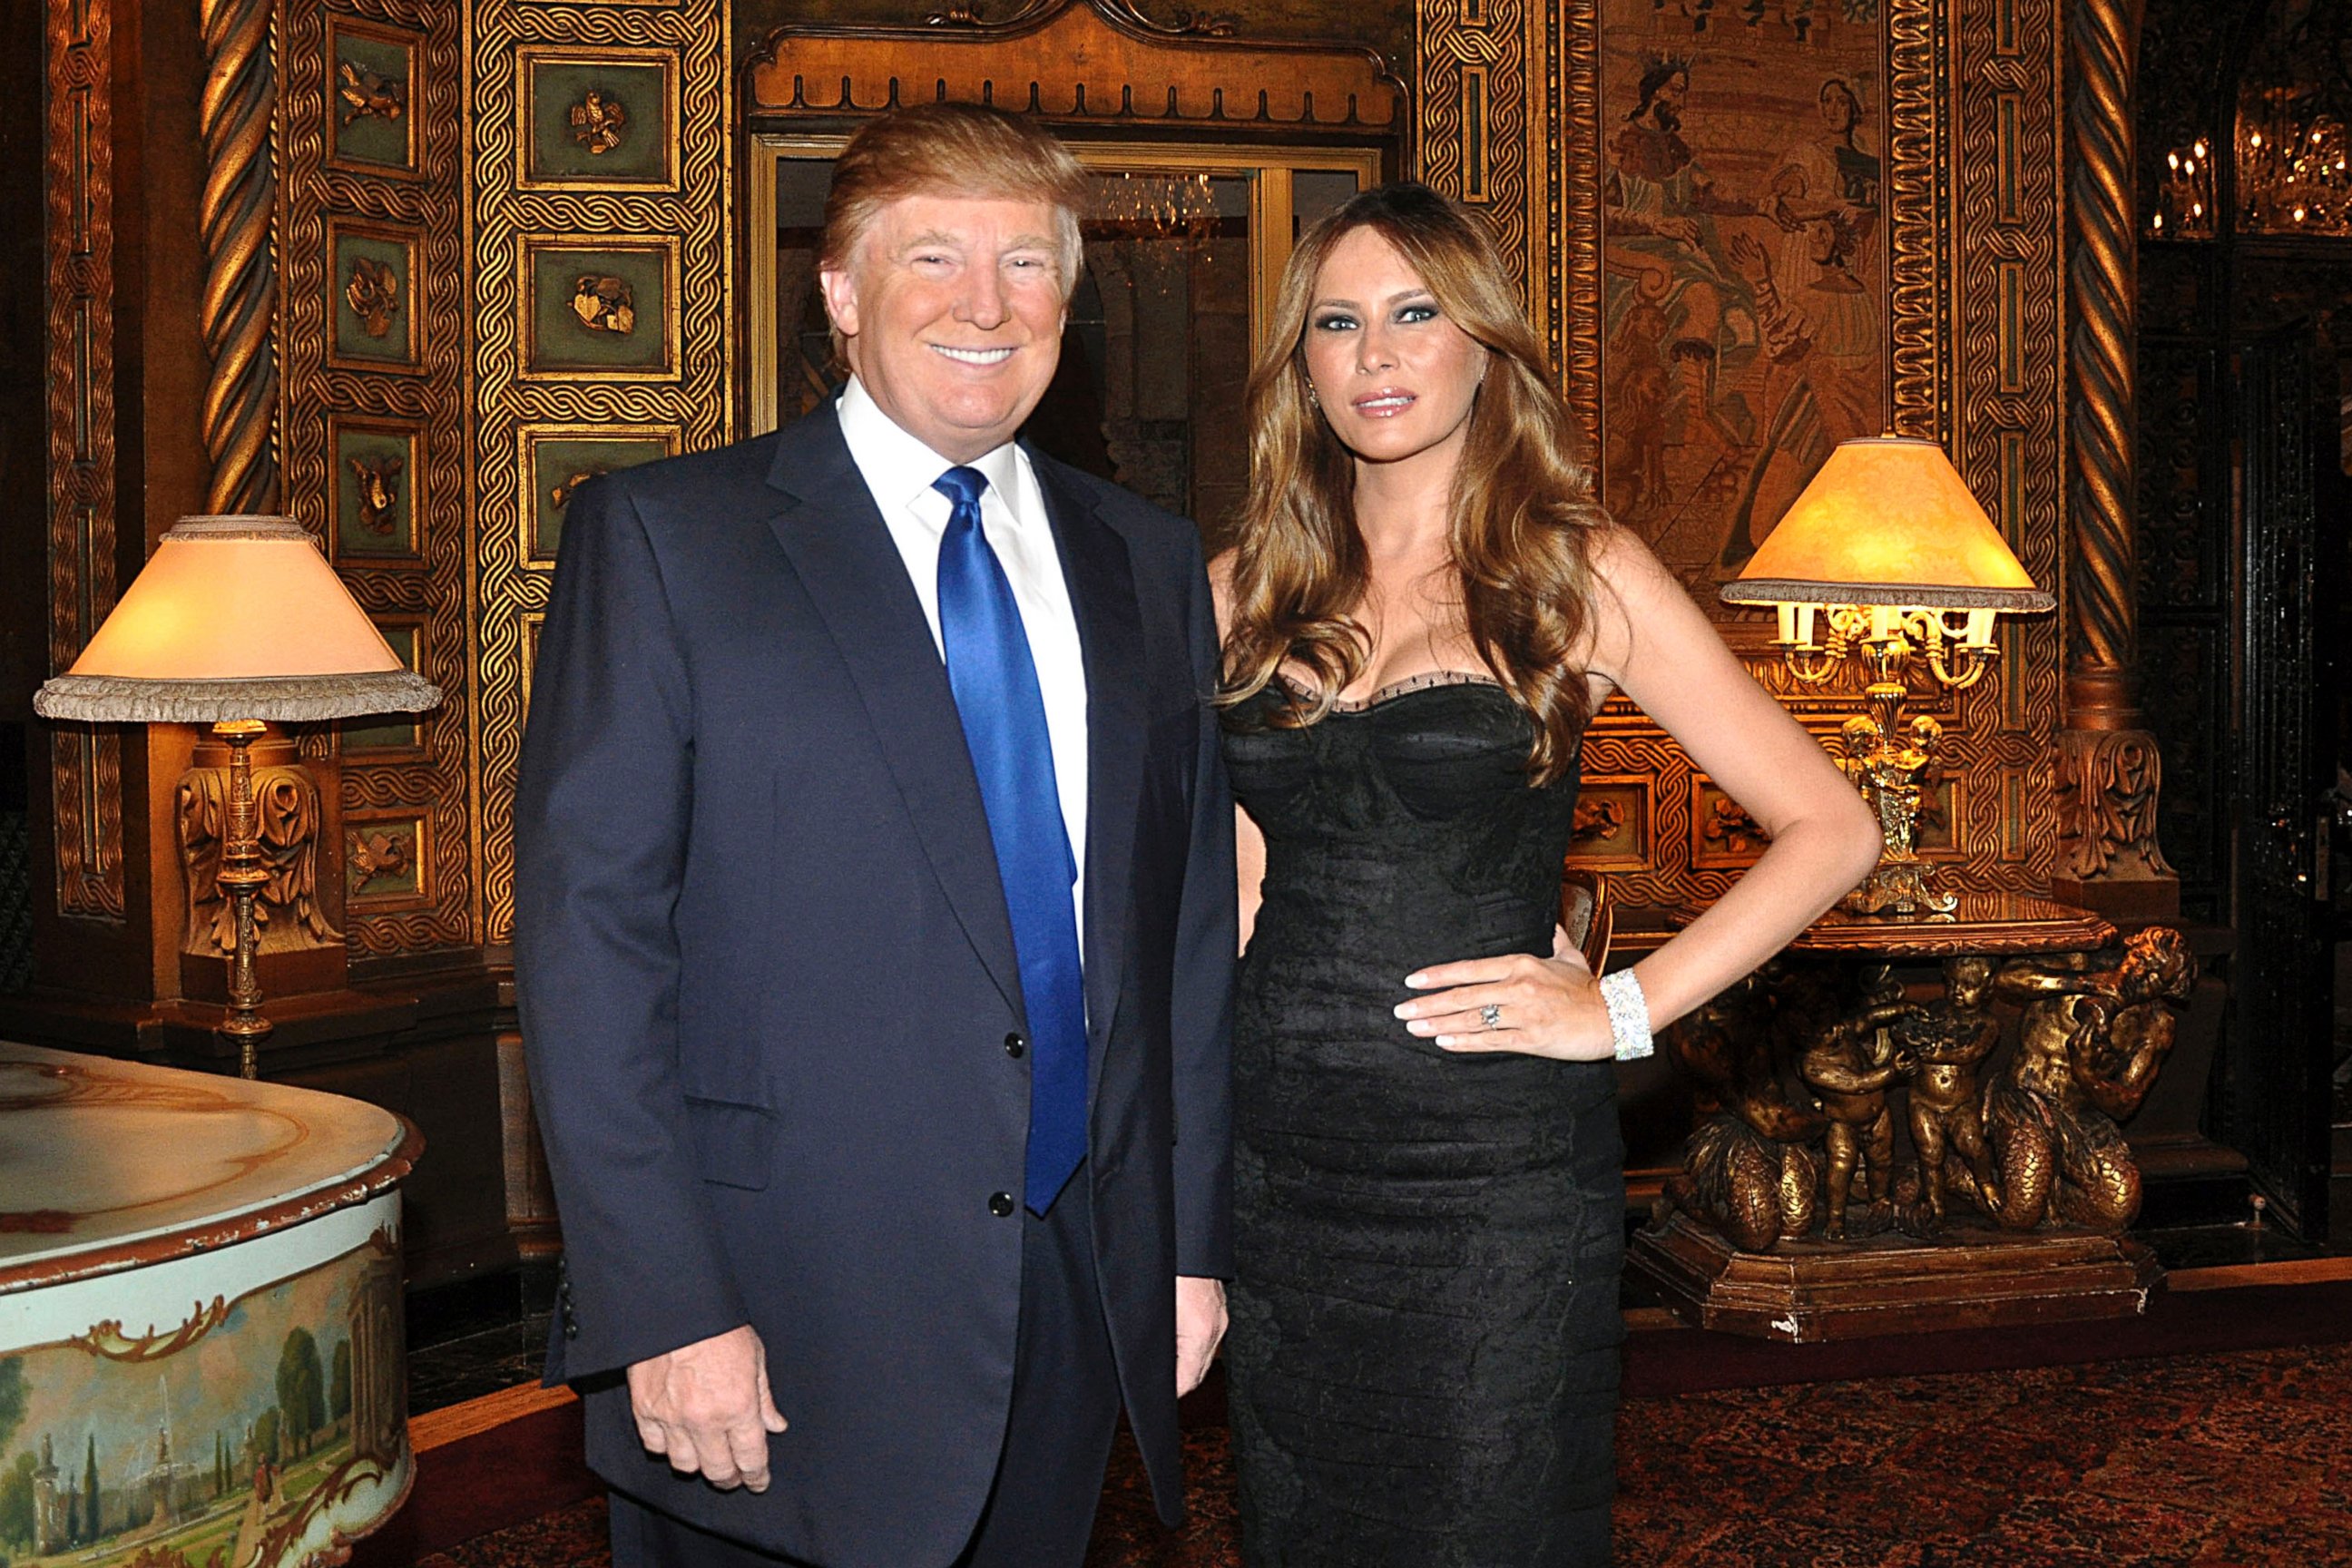 PHOTO: Donald Trump, billionaire real estate developer, left, and his wife Melania Trump stand for a photograph at the Mar-A-Lago Club in Palm Beach, Fla., U.S.,Feb. 19, 2011. 